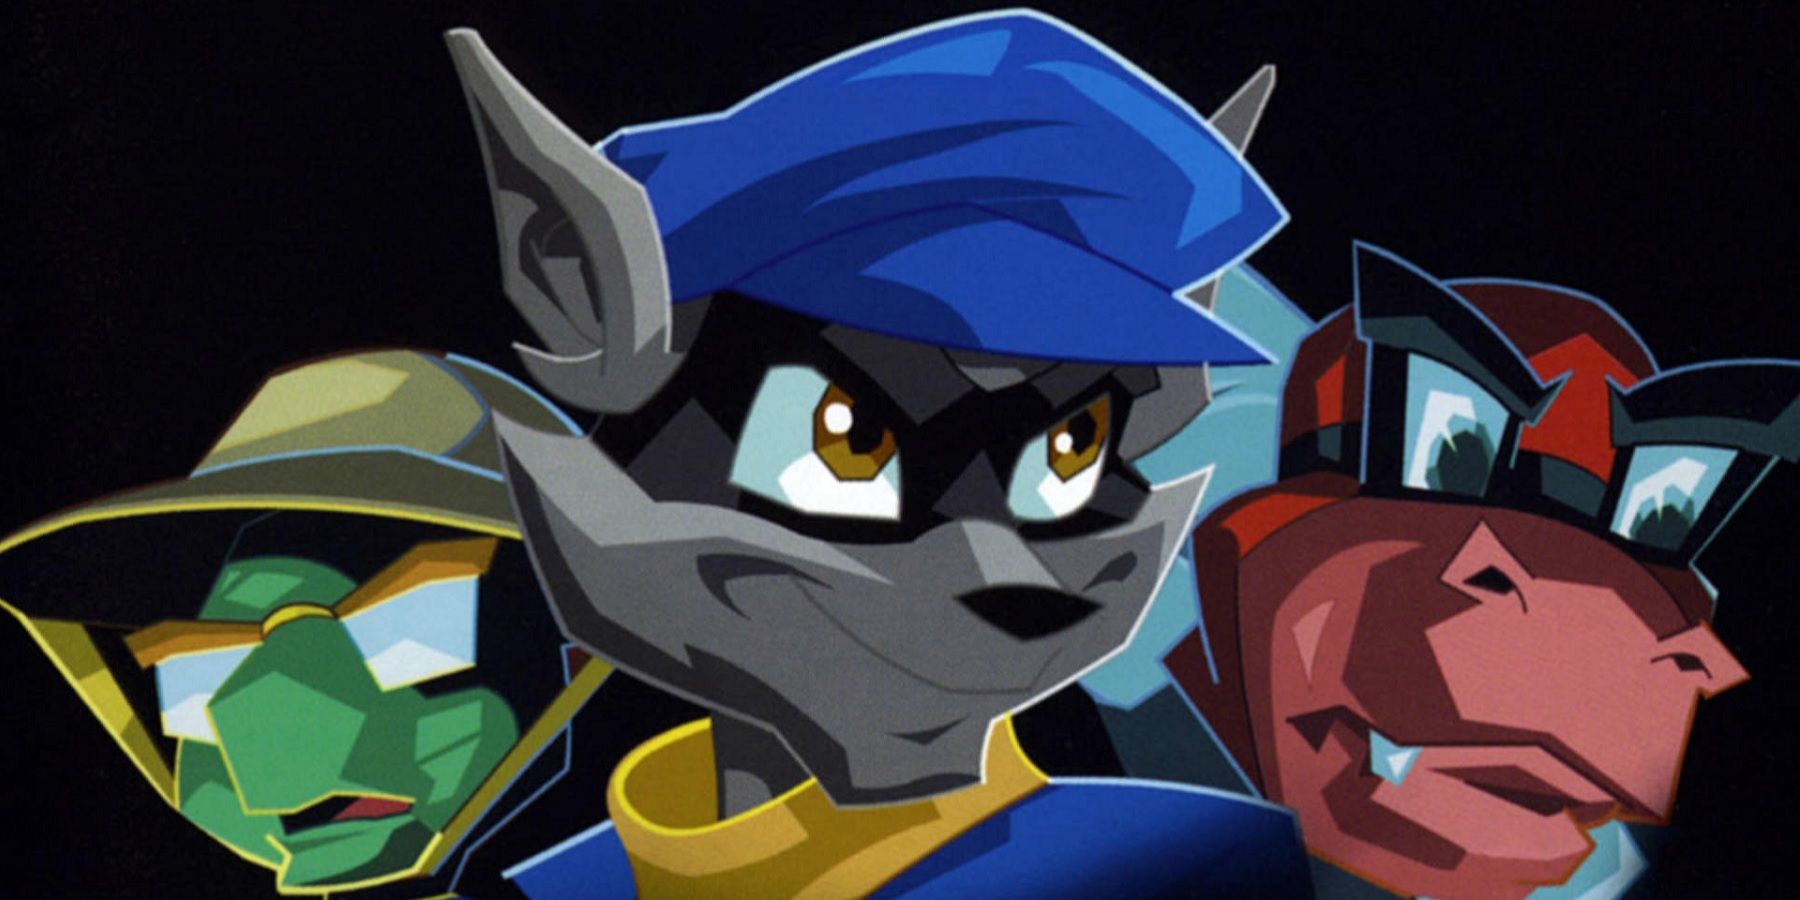 sly cooper characters